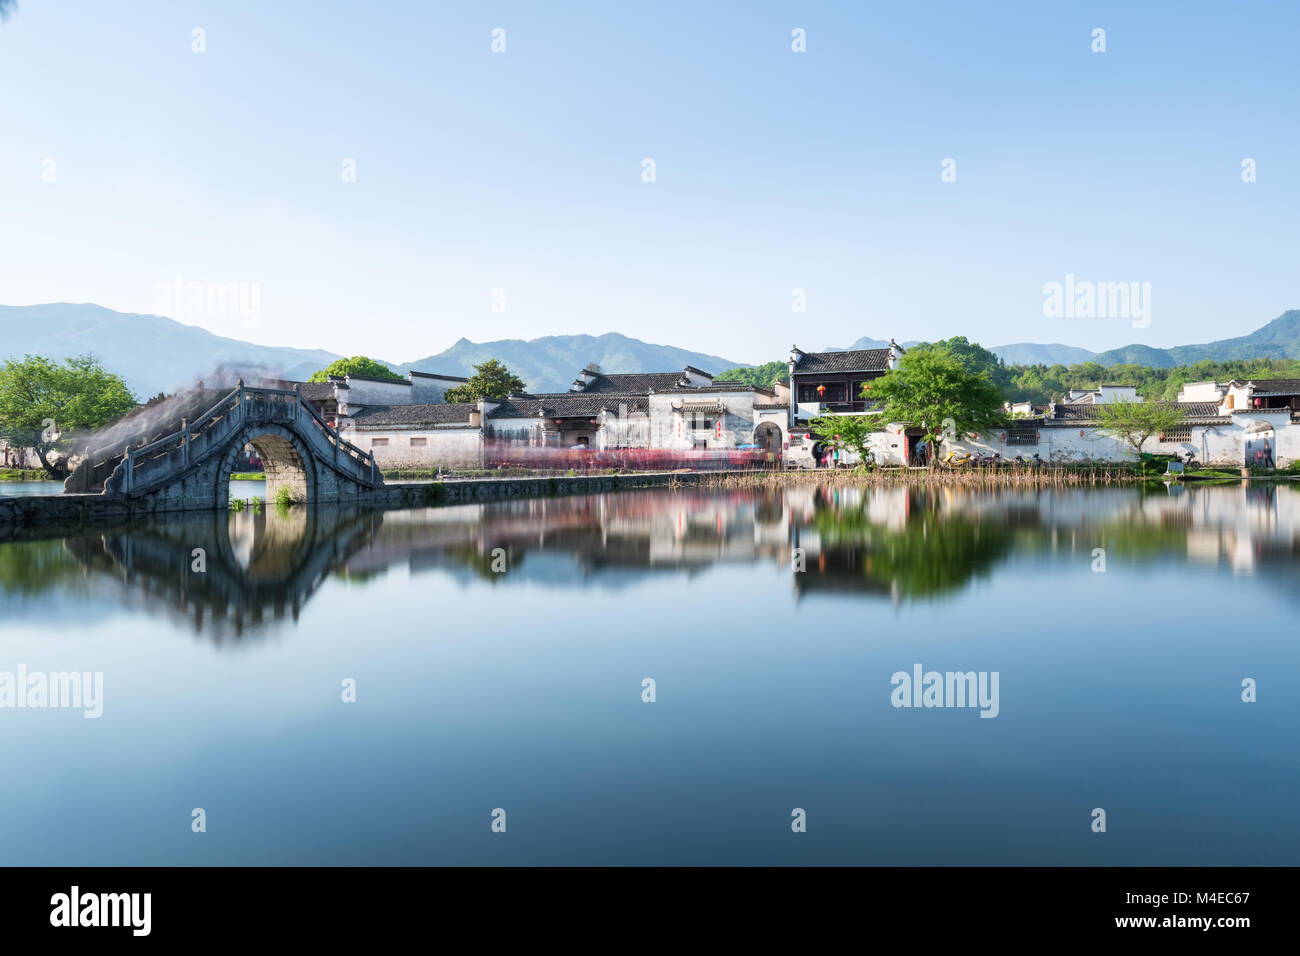 a village in the chinese paintings Stock Photo